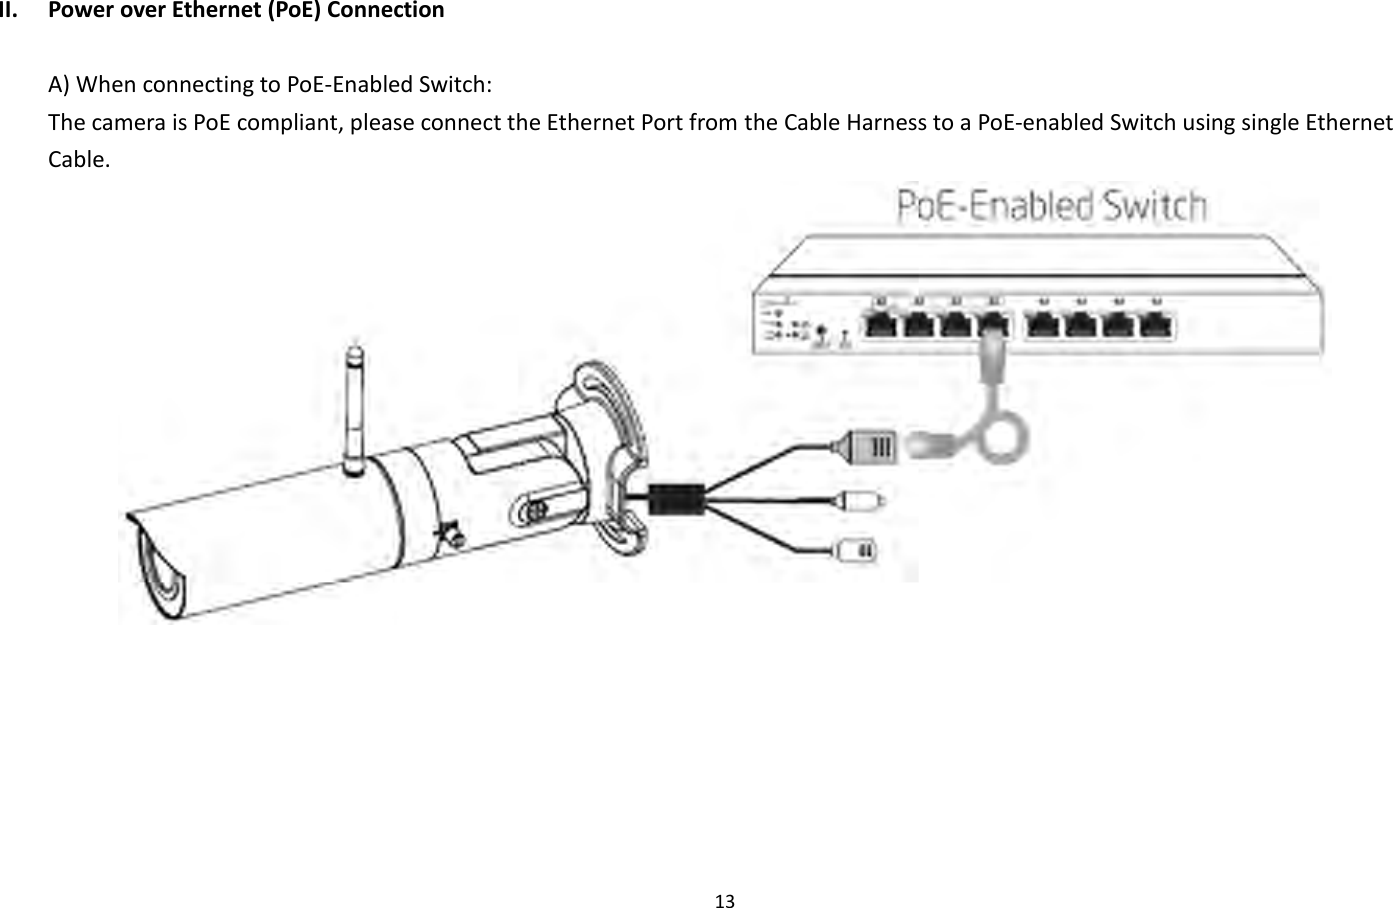 13  II. Power over Ethernet (PoE) Connection  A) When connecting to PoE-Enabled Switch: The camera is PoE compliant, please connect the Ethernet Port from the Cable Harness to a PoE-enabled Switch using single Ethernet Cable.  